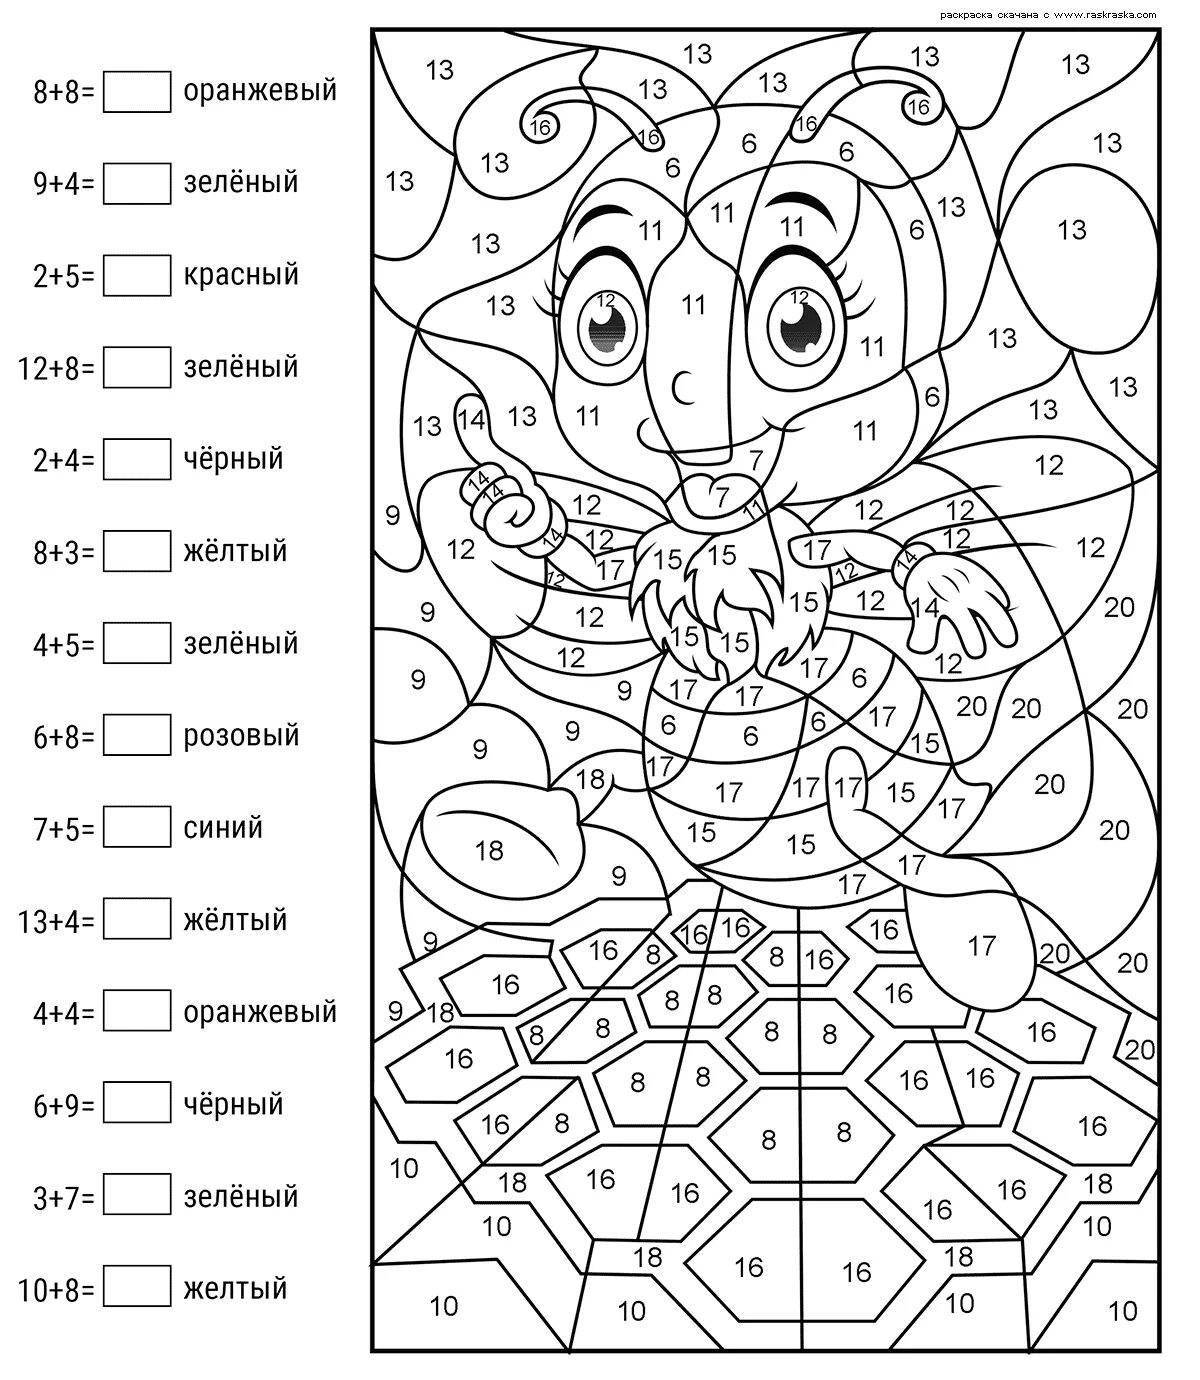 Unique coloring by numbers for kids 6-7 years old